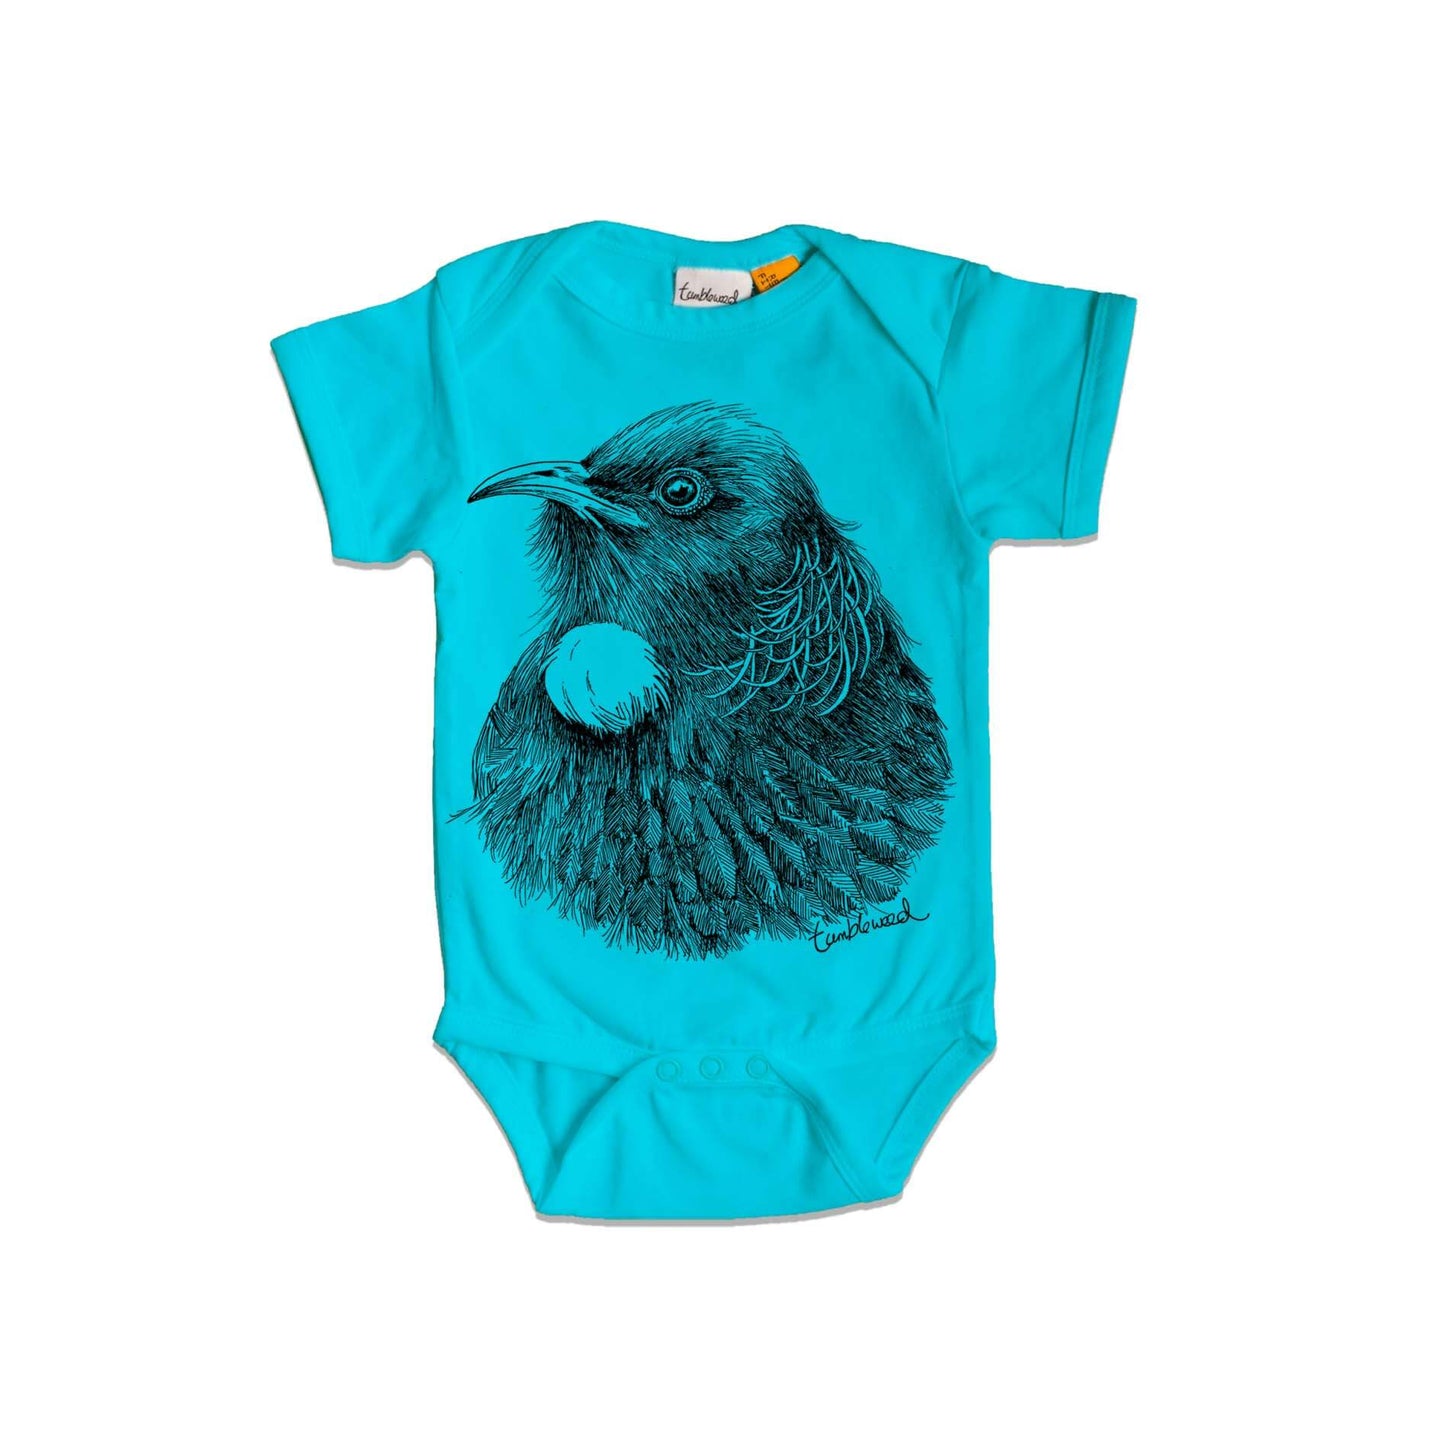 Short sleeved, blue, organic cotton, baby onesie featuring a screen printed Tui design.